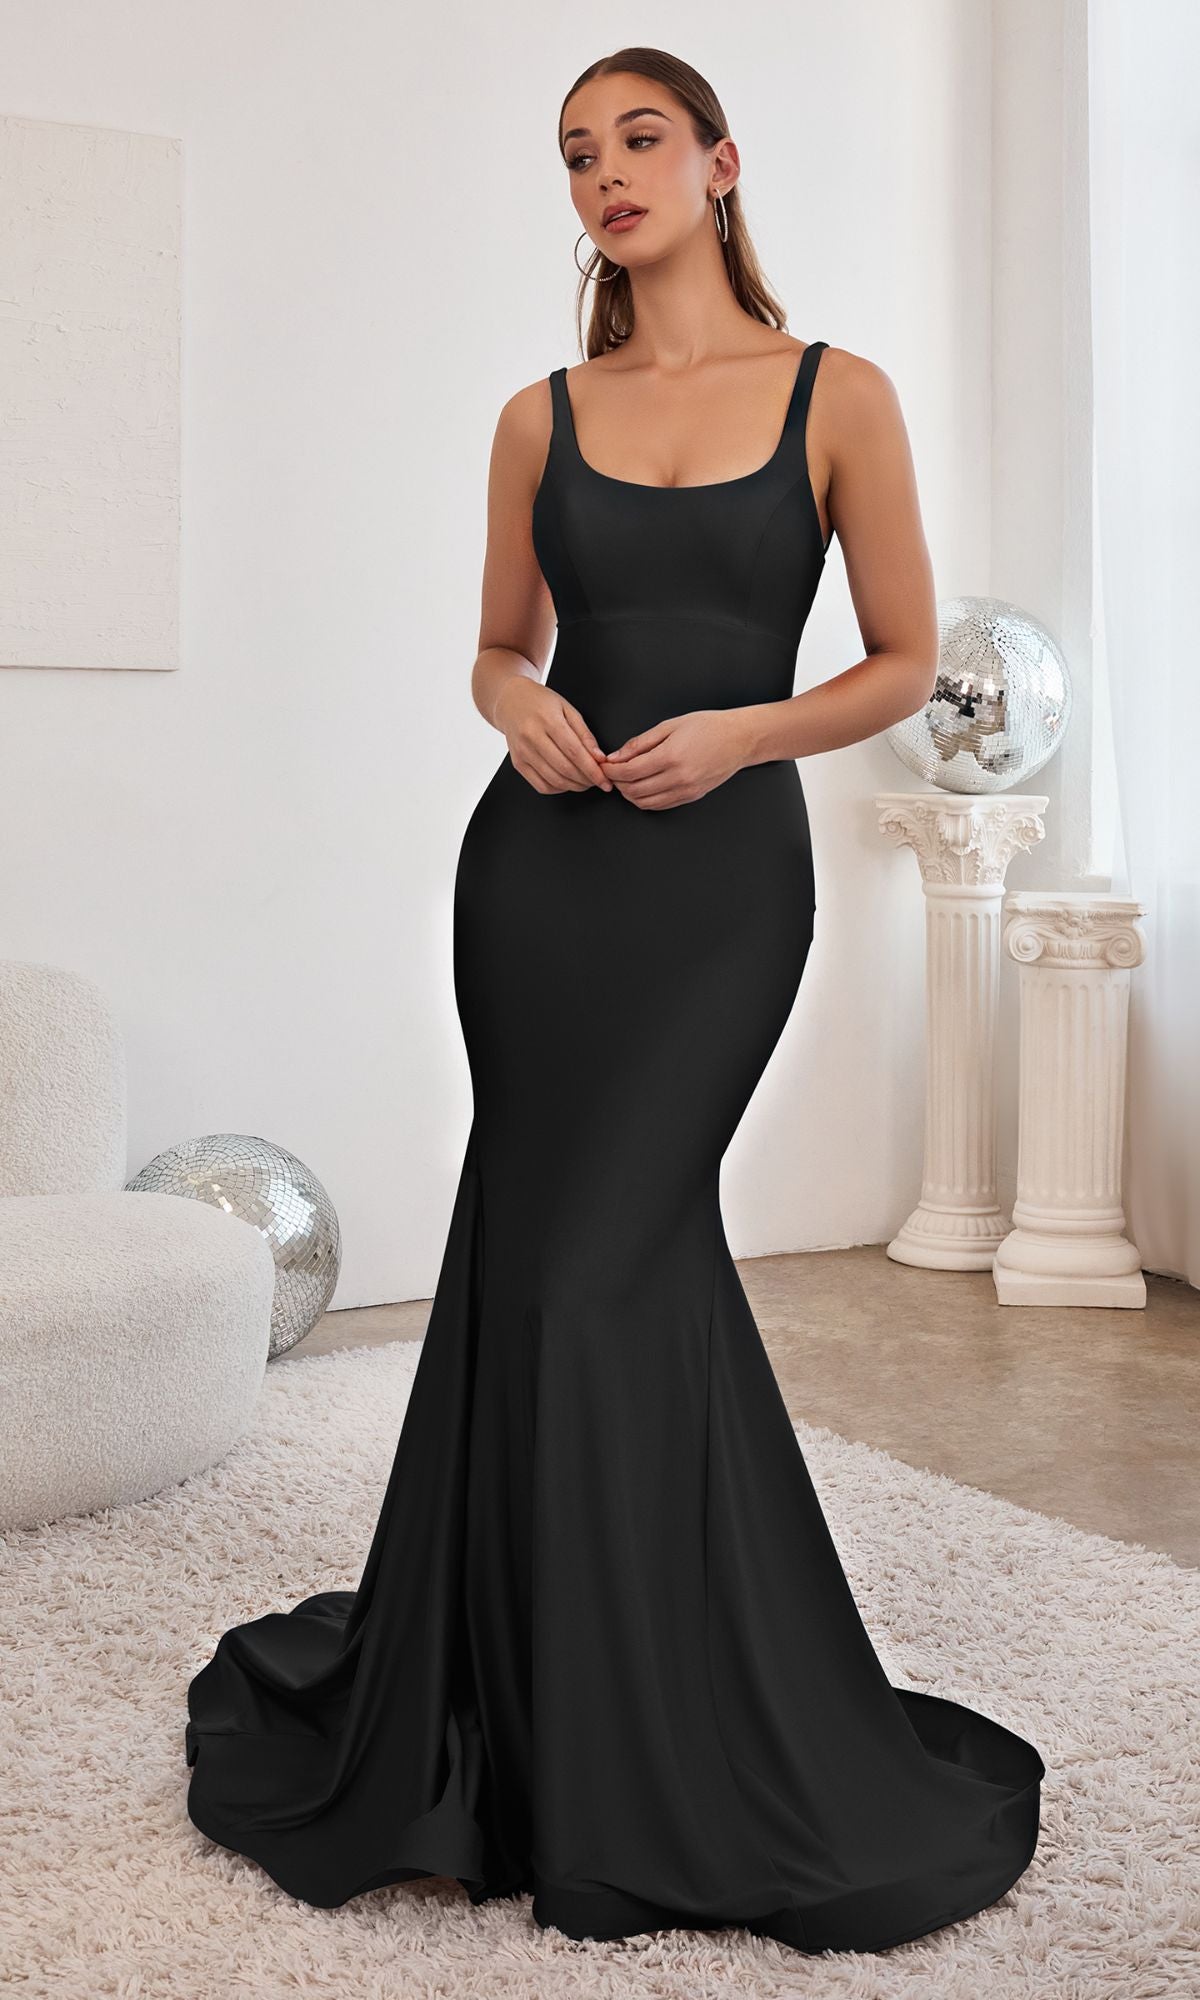 Long Mermaid Prom Dress with Open Back - PromGirl